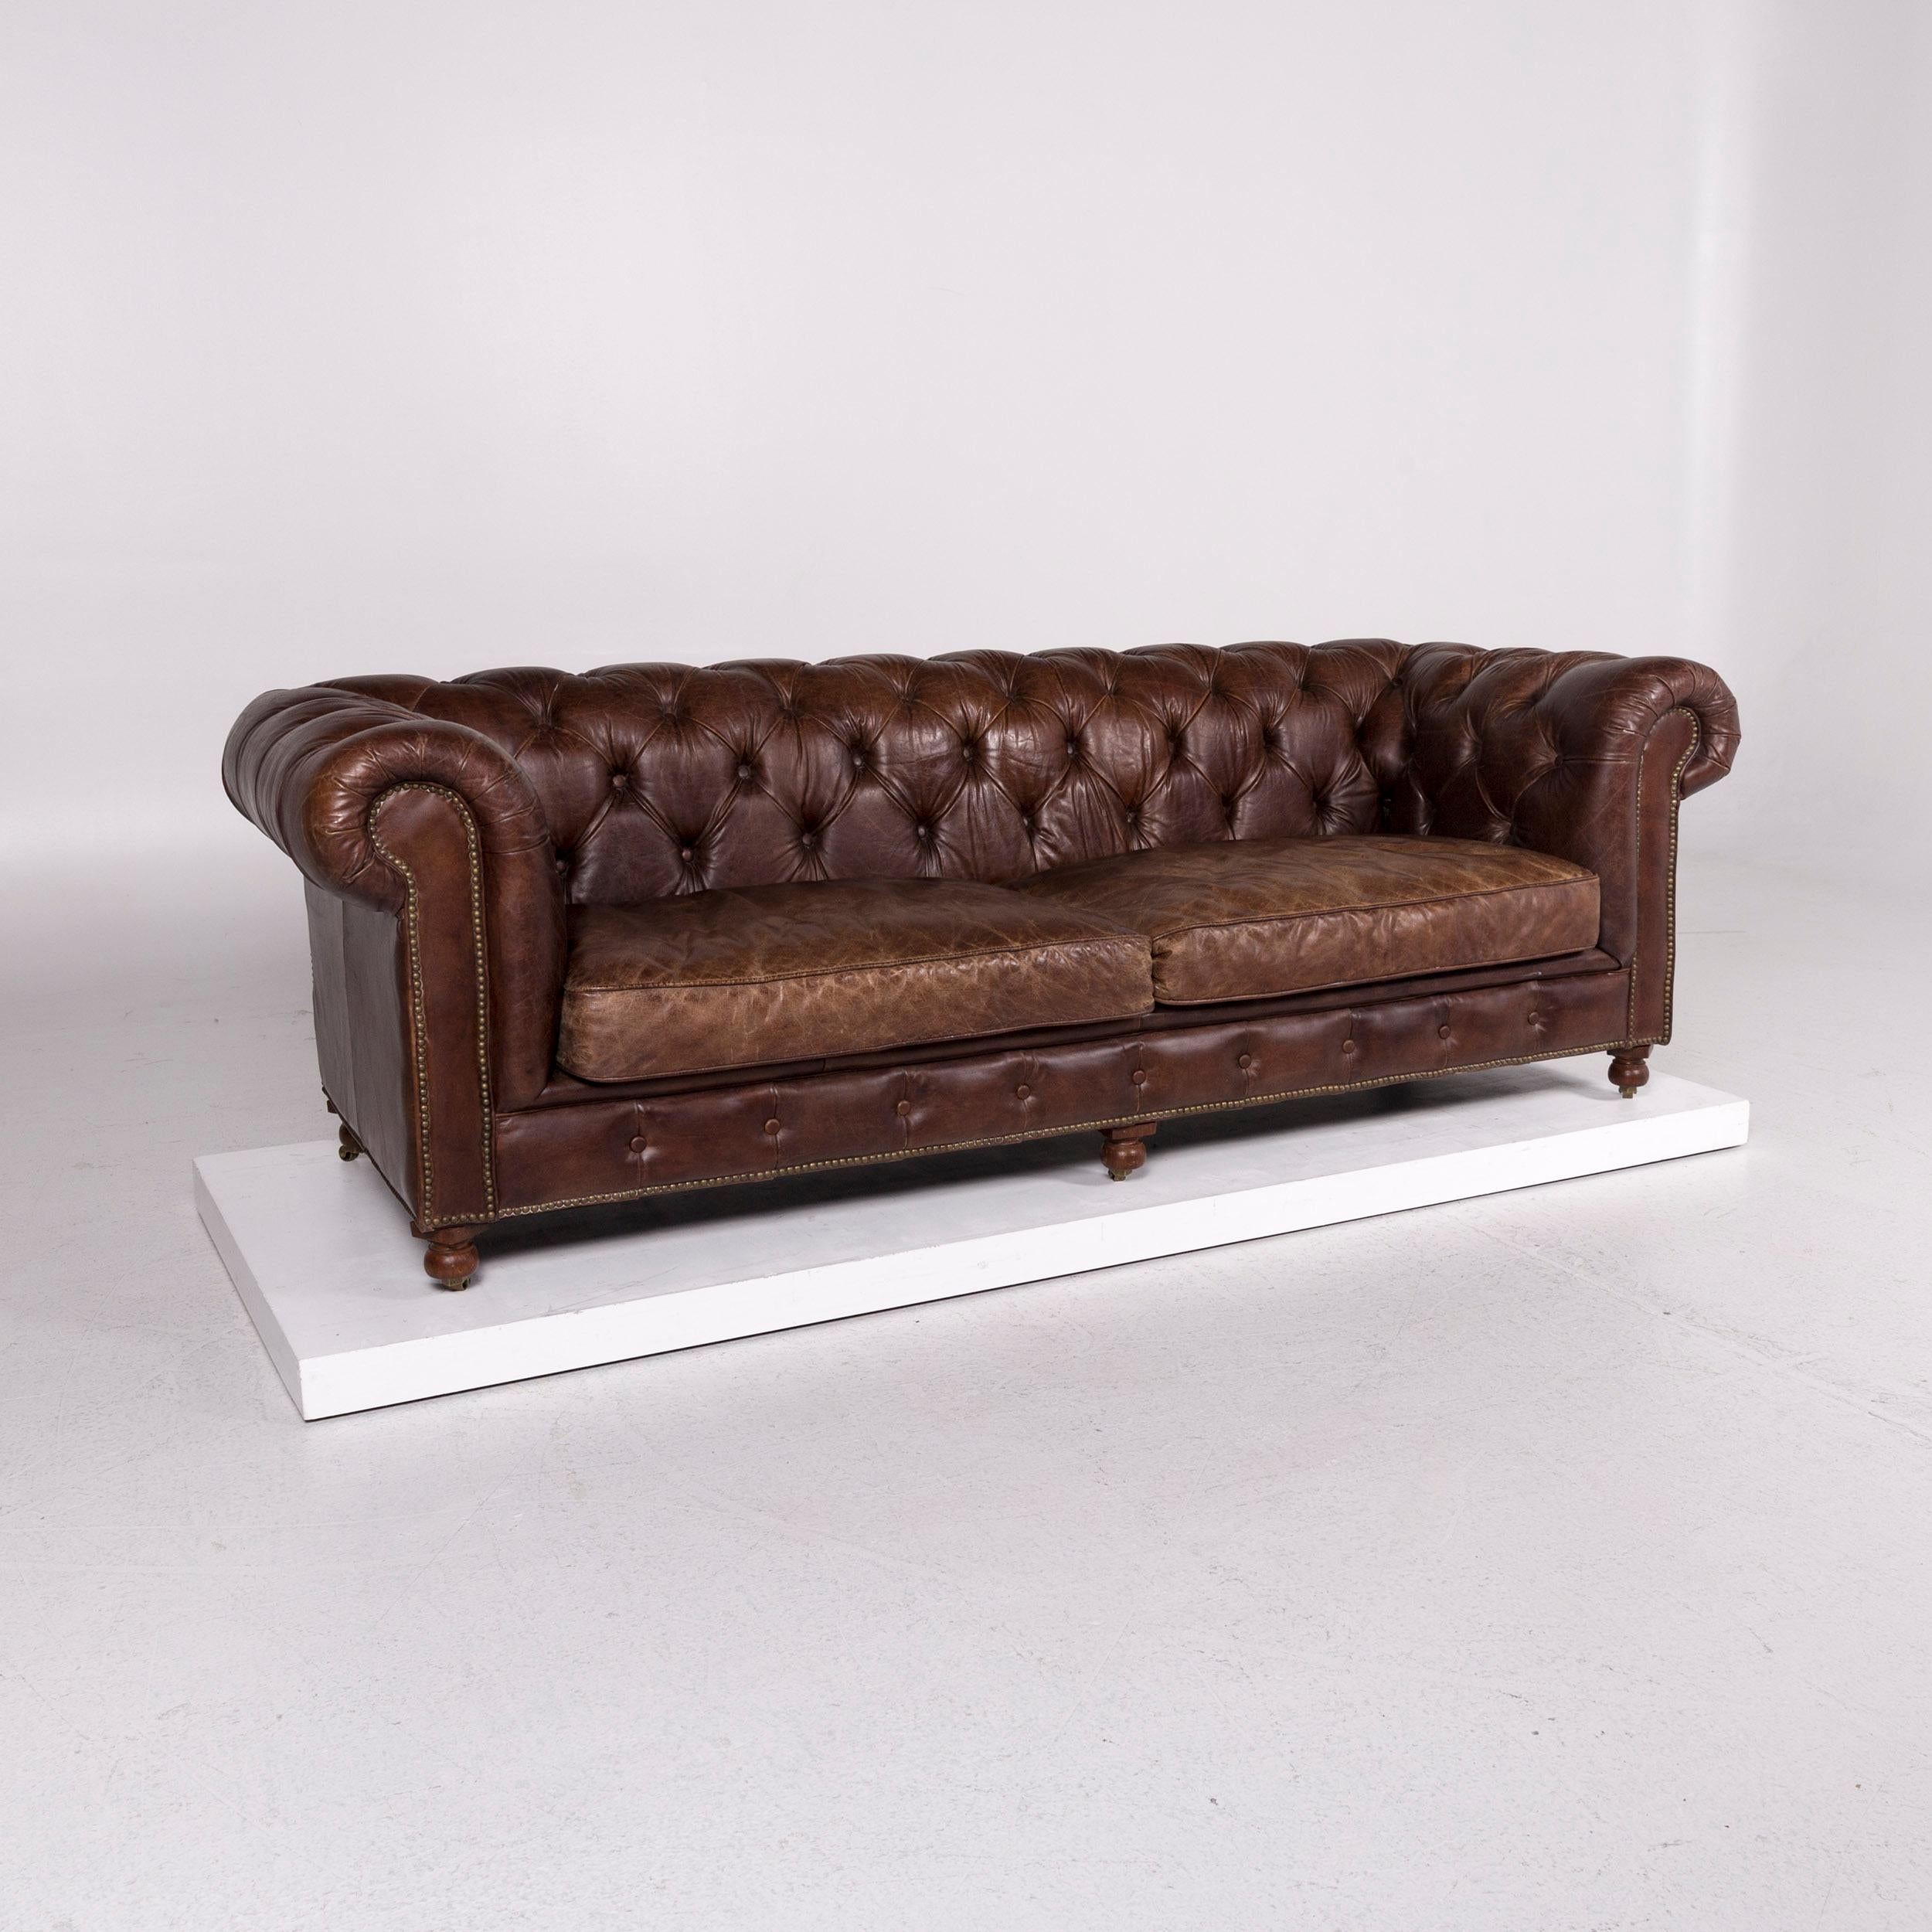 We bring to you a Chesterfield leather set brown 1 three-seat 1 armchair retro.
 

Product measurements in centimetres:
 

Depth 105
Width 242
Height 79
Seat-height 52
Rest-height 79
Seat-depth 65
Seat-width 172
Back-height 33.
 